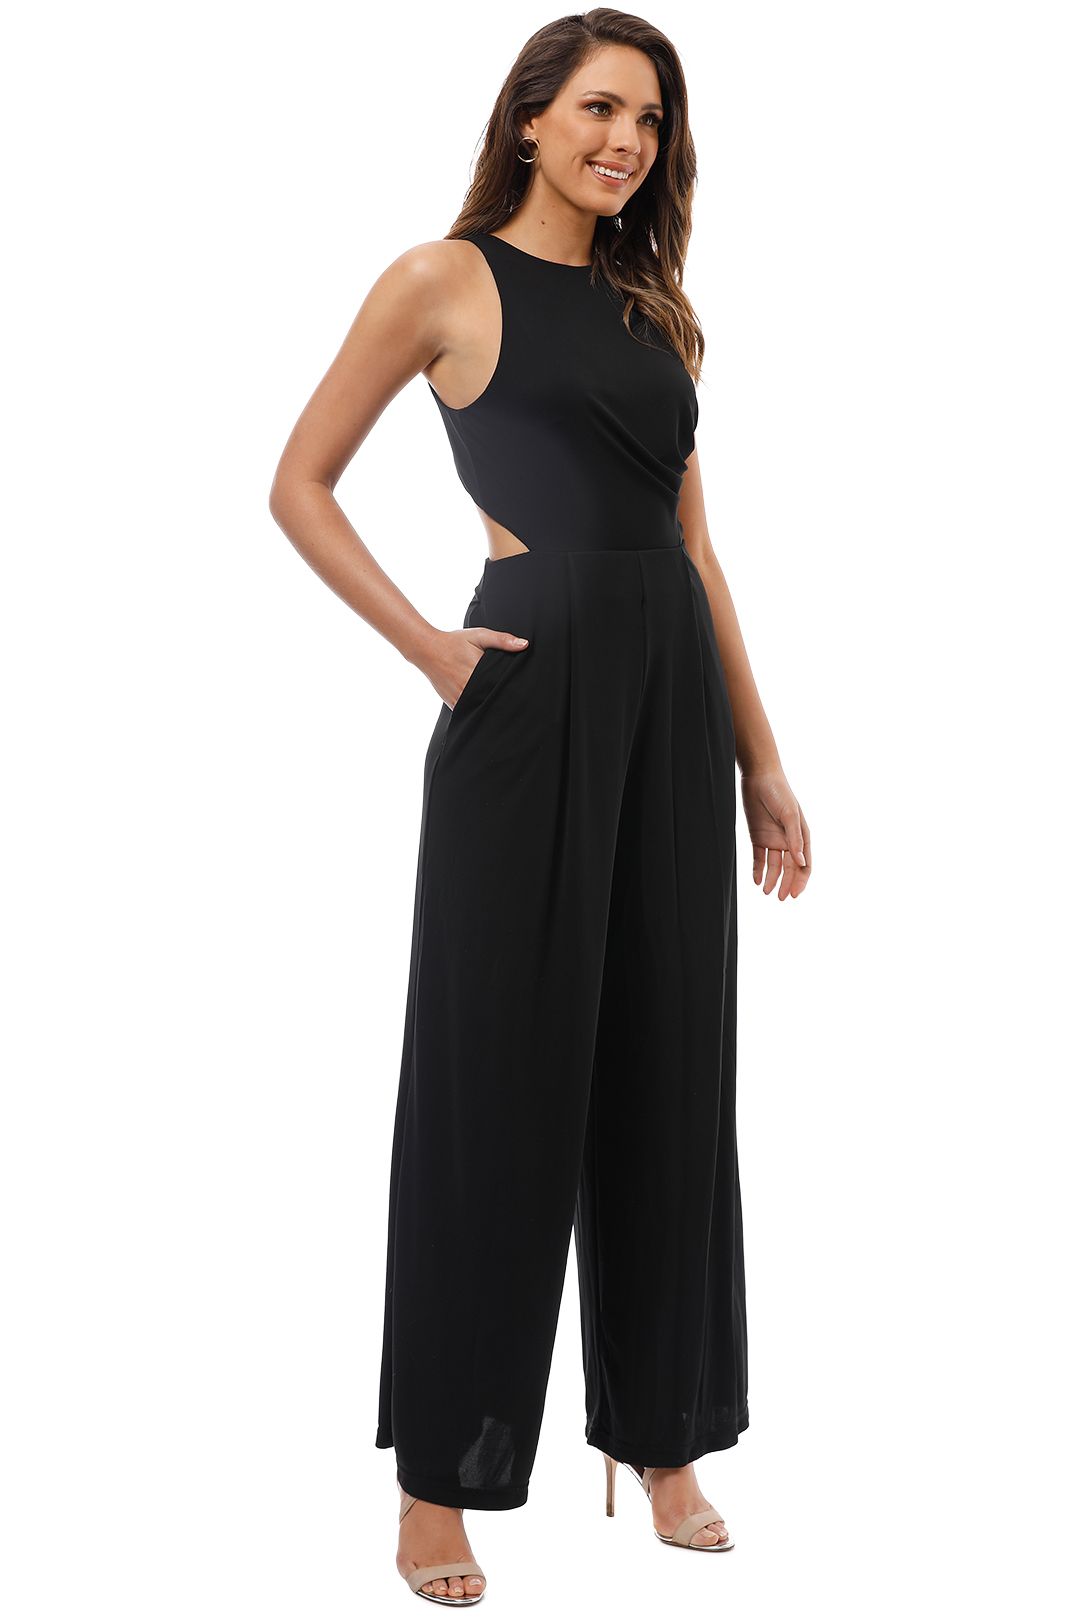 Queen Bee Pantsuit in Black by Pasduchas for Hire